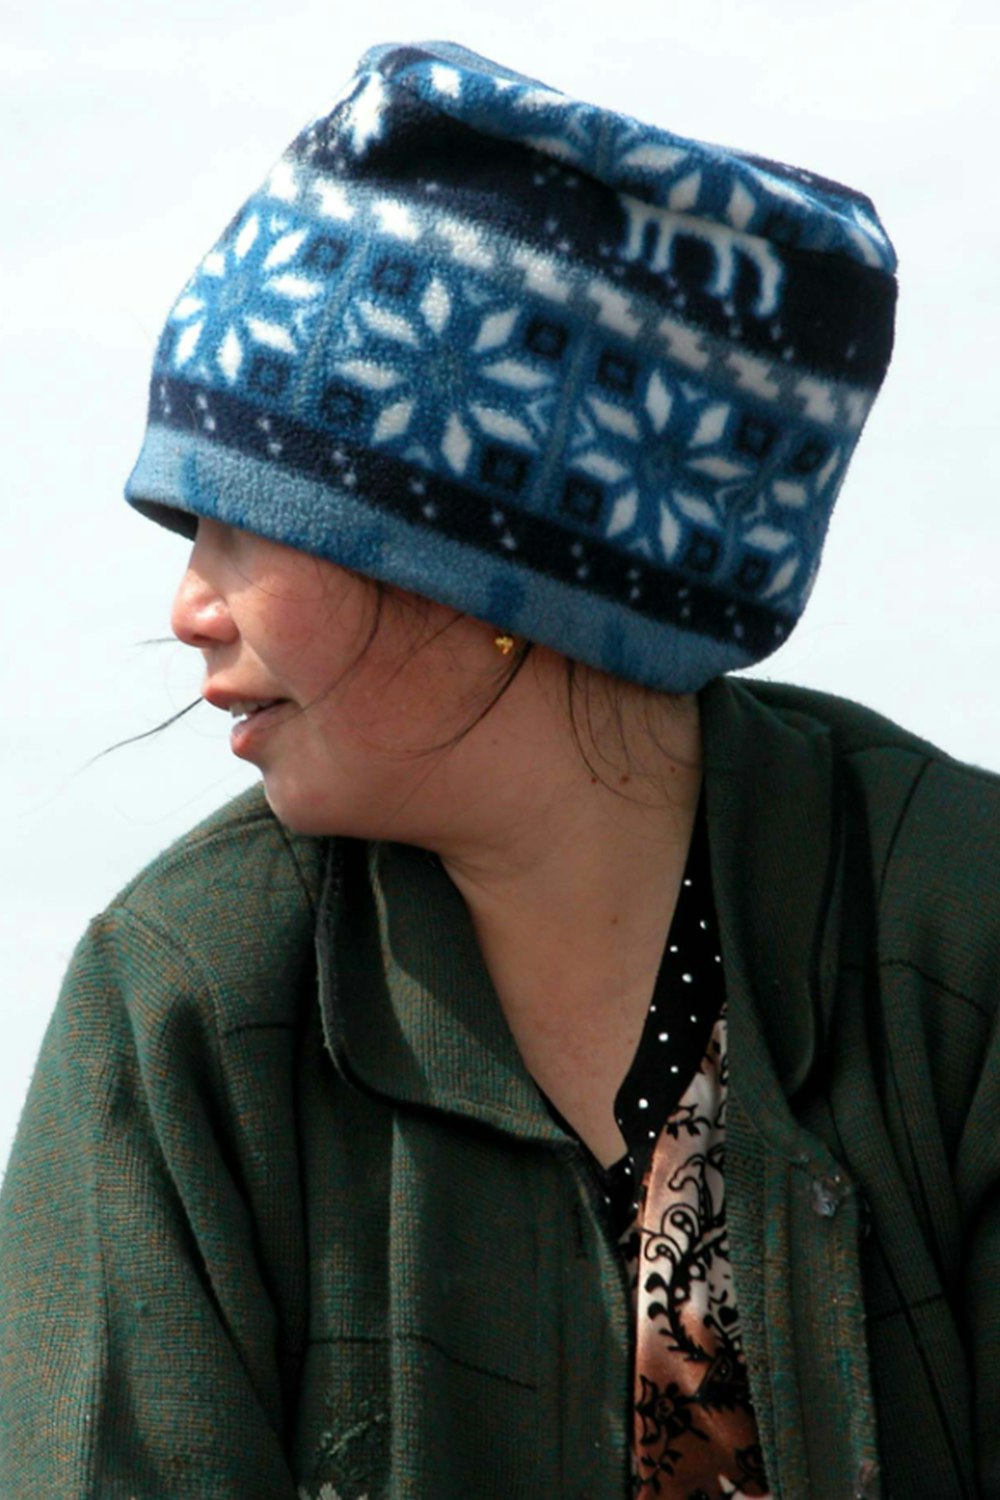 woman in green jacket wearing blue and white knit cap